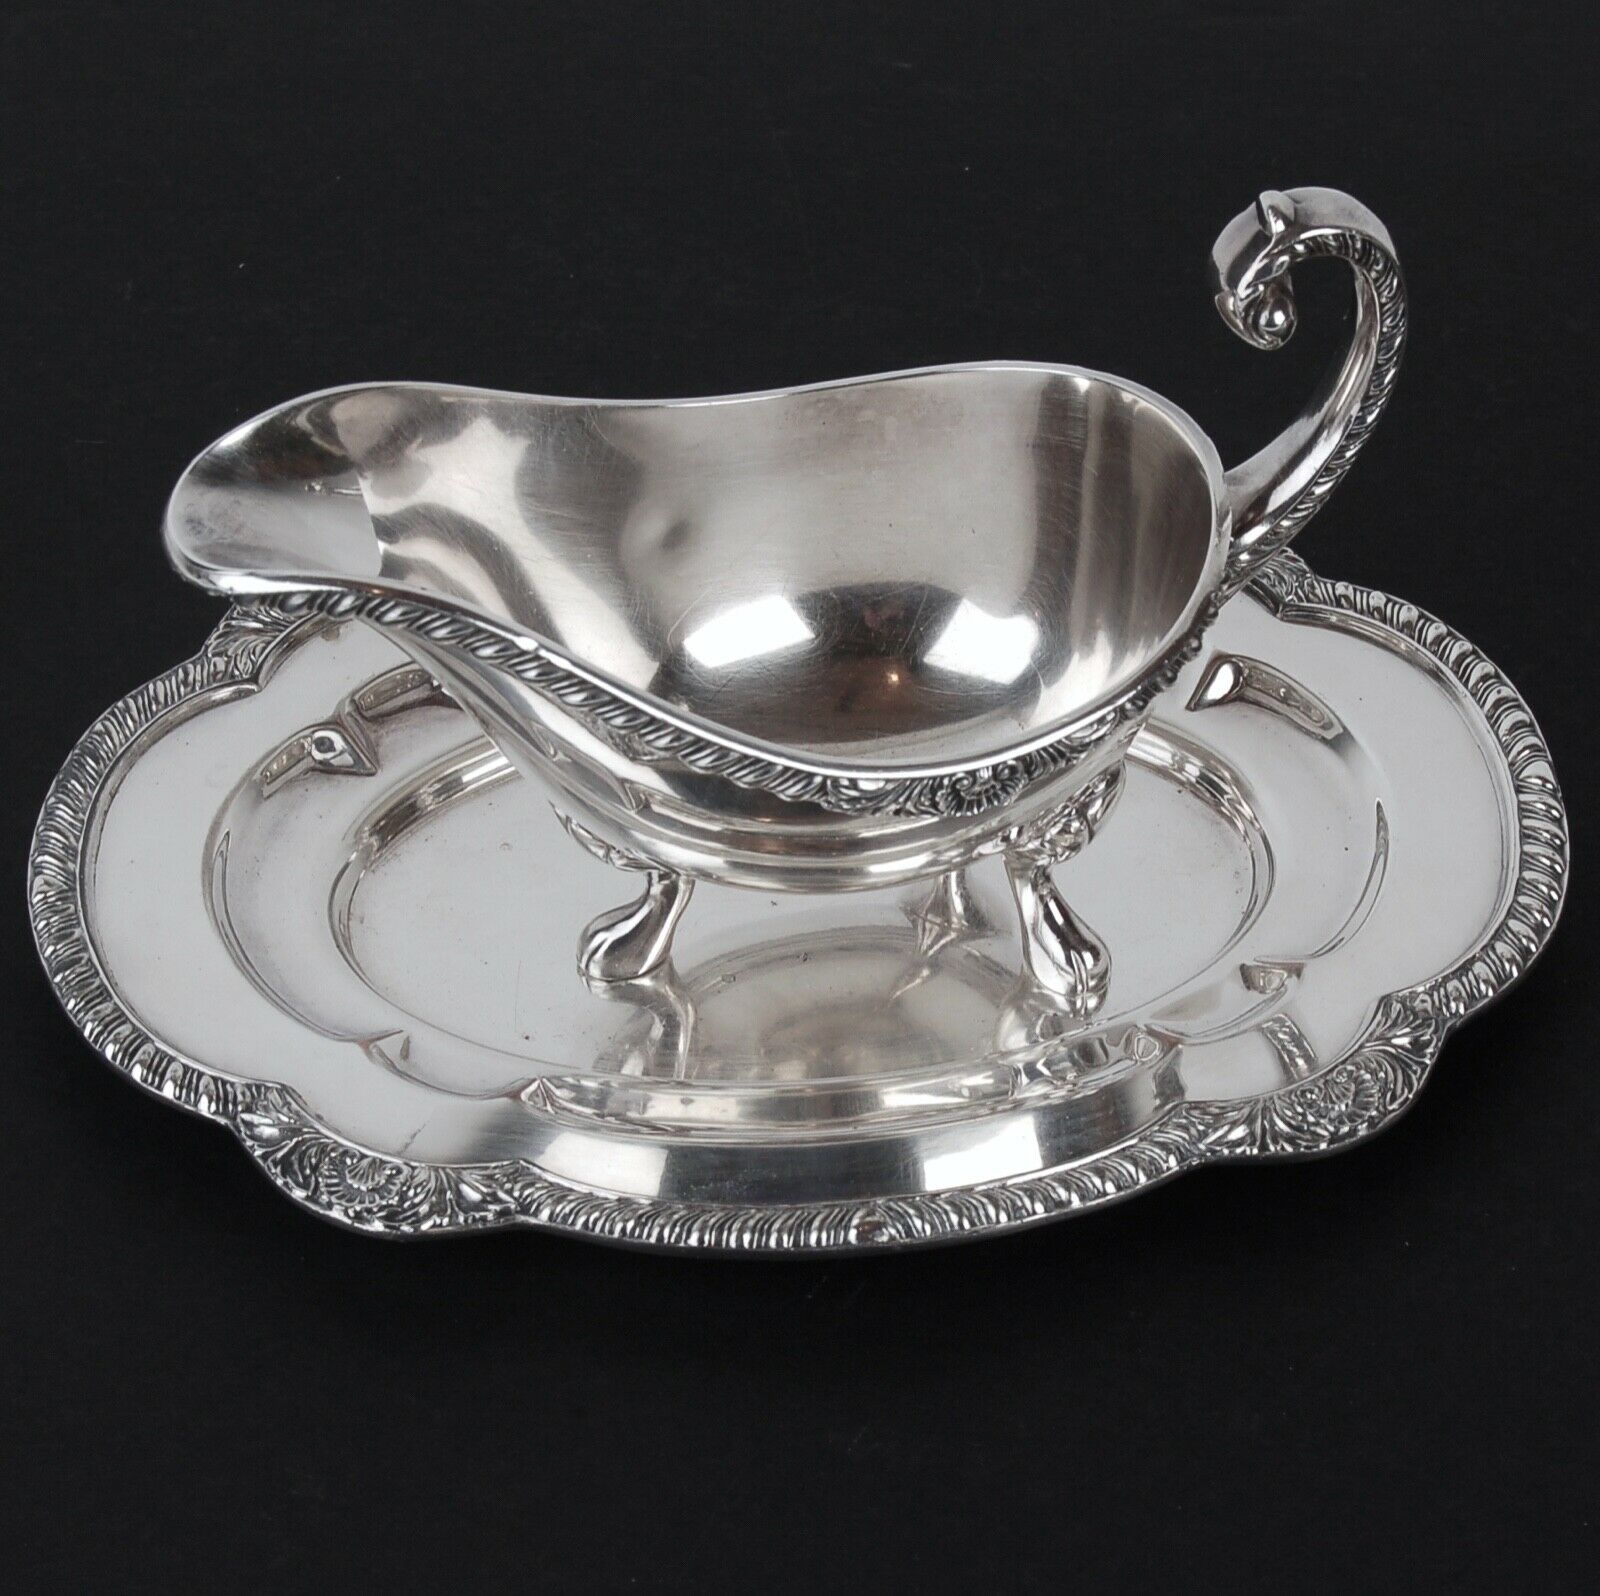 Vintage Gravy Sauce Boat And Tray Epc 143 Silver 856g Ornate Rim 2 Lions Maker